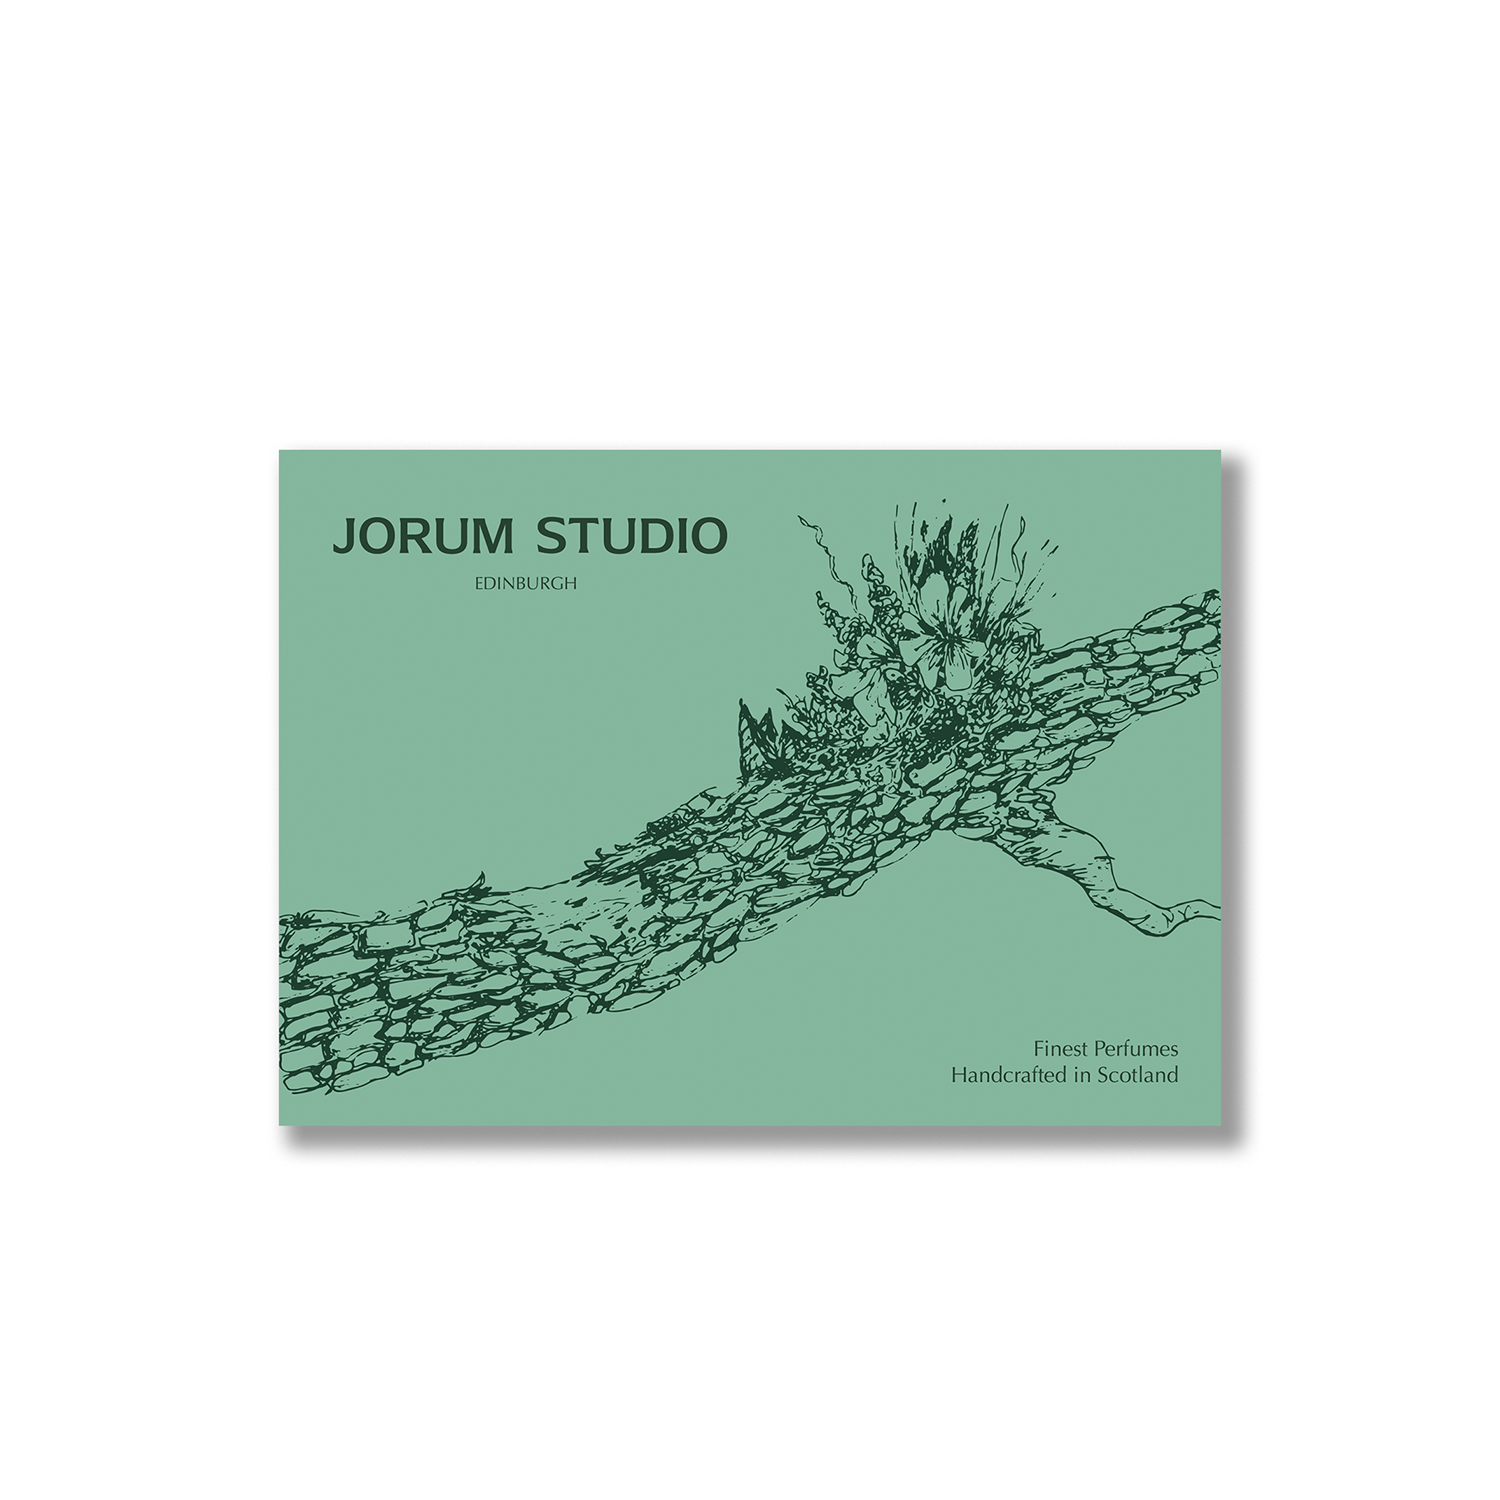 Jorum Studio digital gift card featuring a floral illustration on a pale green background